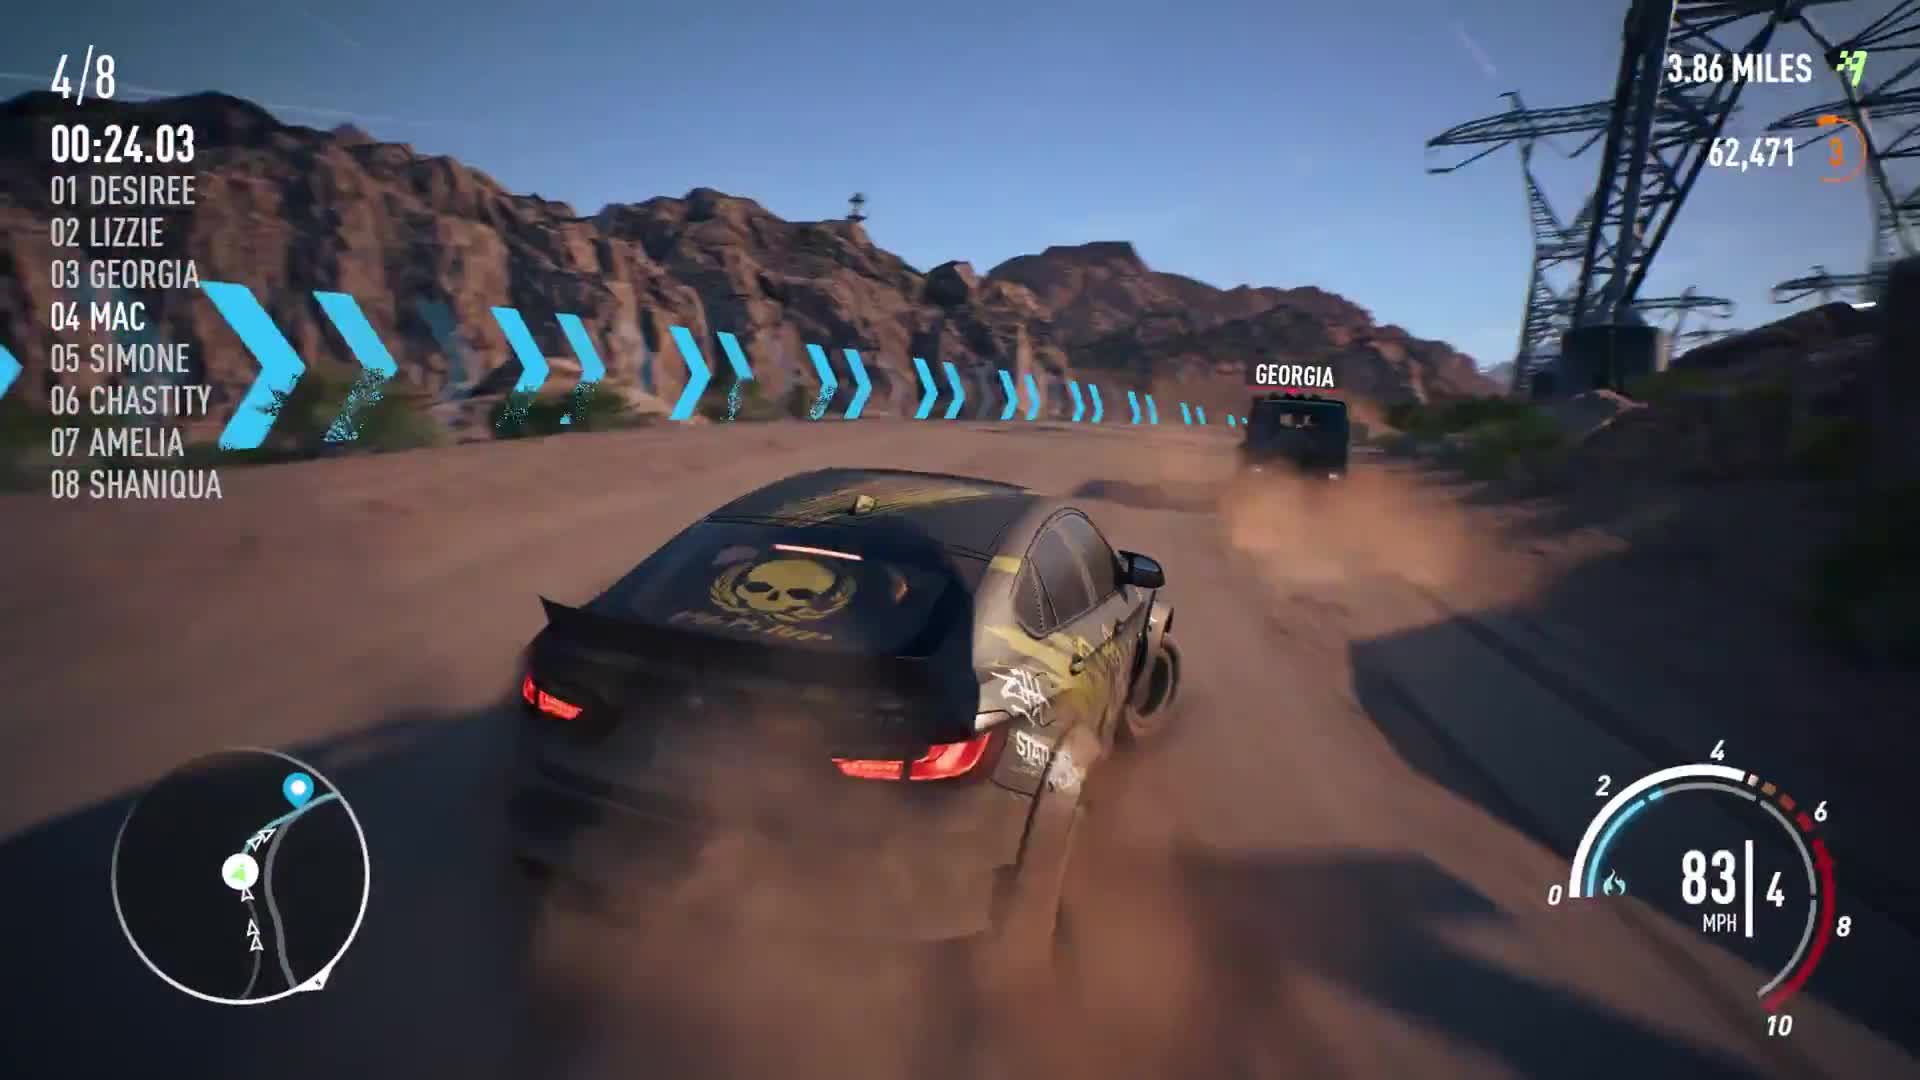 NFS Payback - Offroad racing